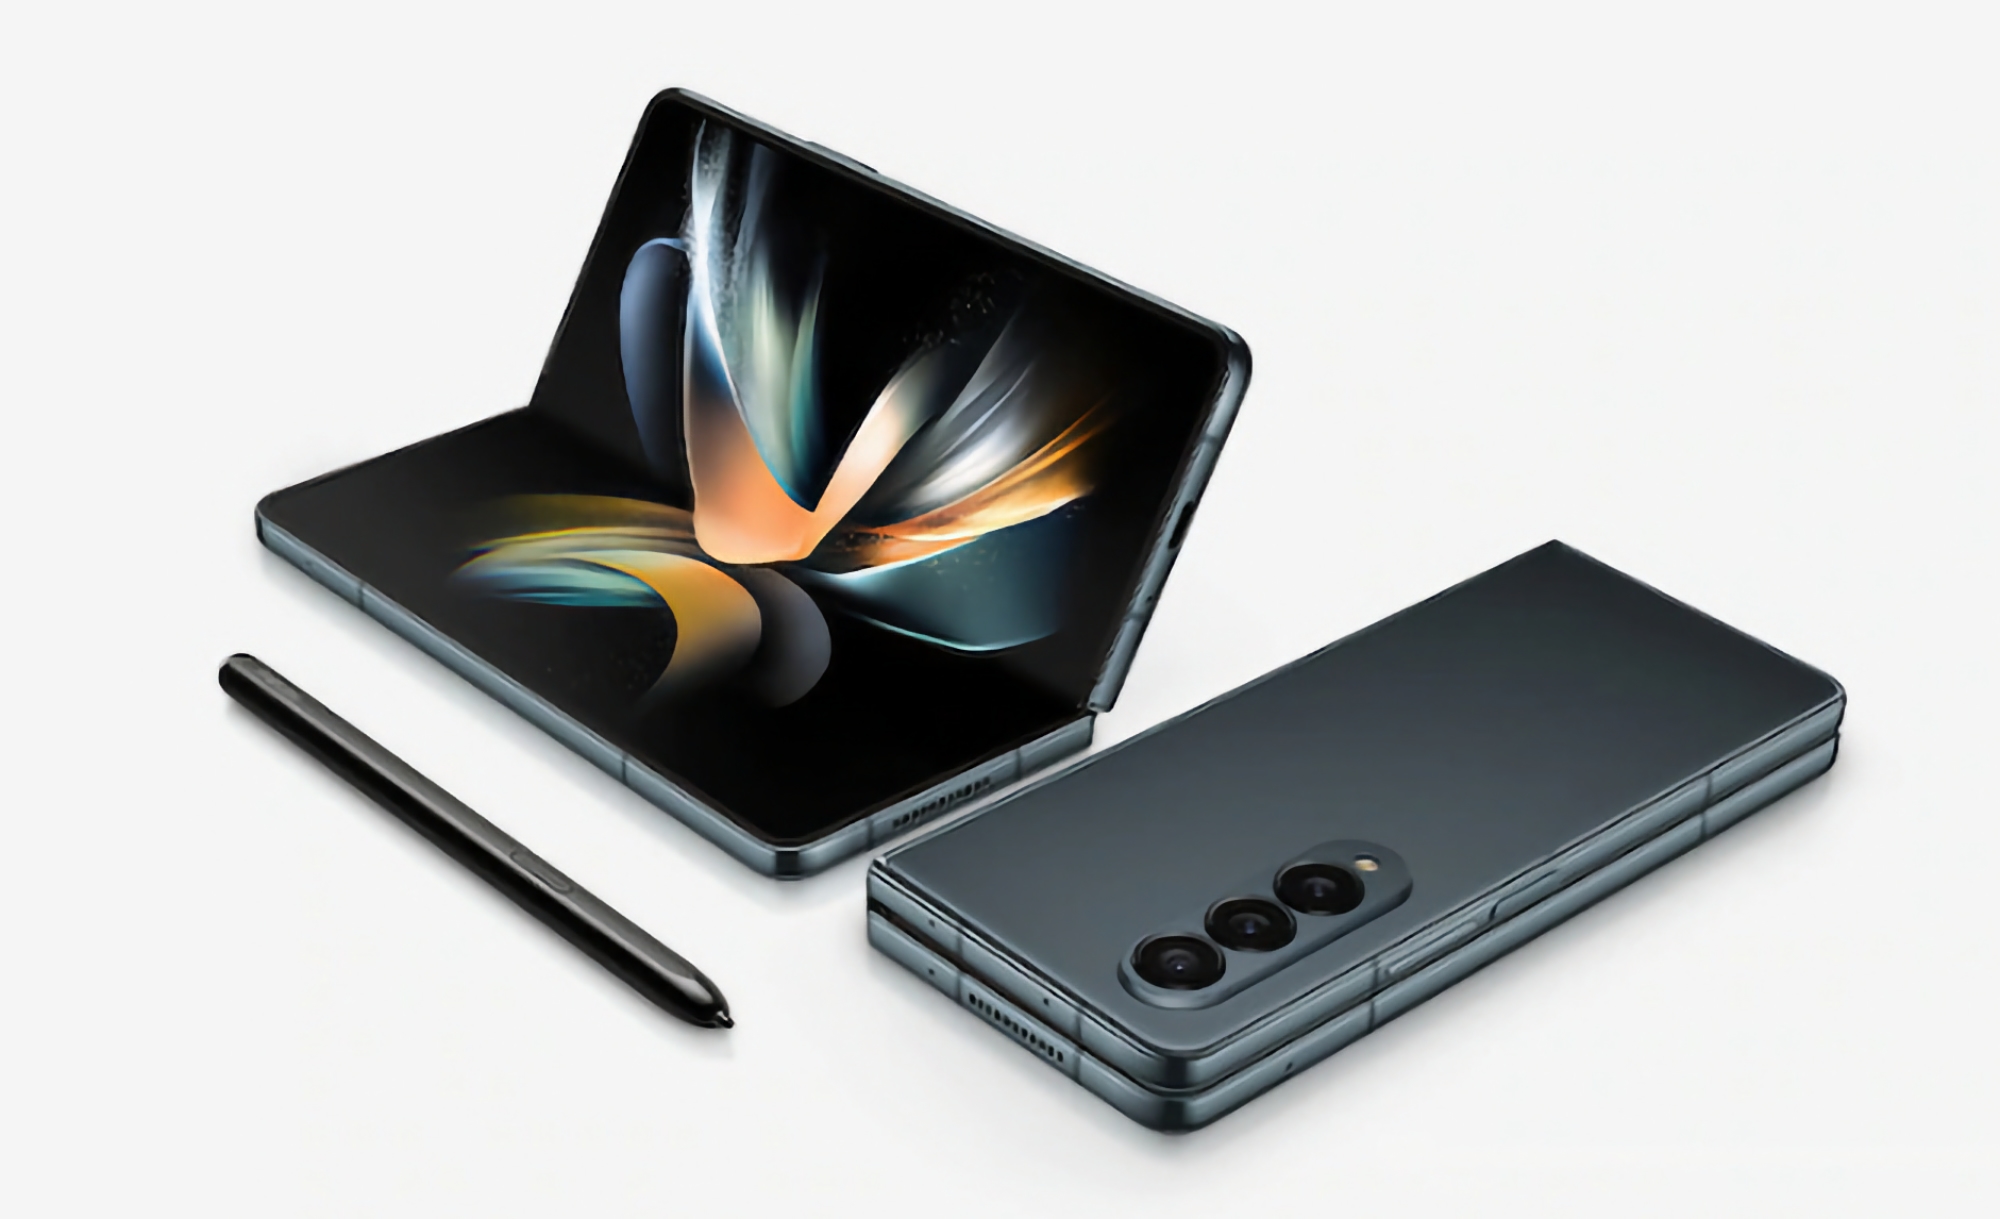 Insider: Galaxy Fold 5 to become Samsung's lightest and thinnest foldable smartphone